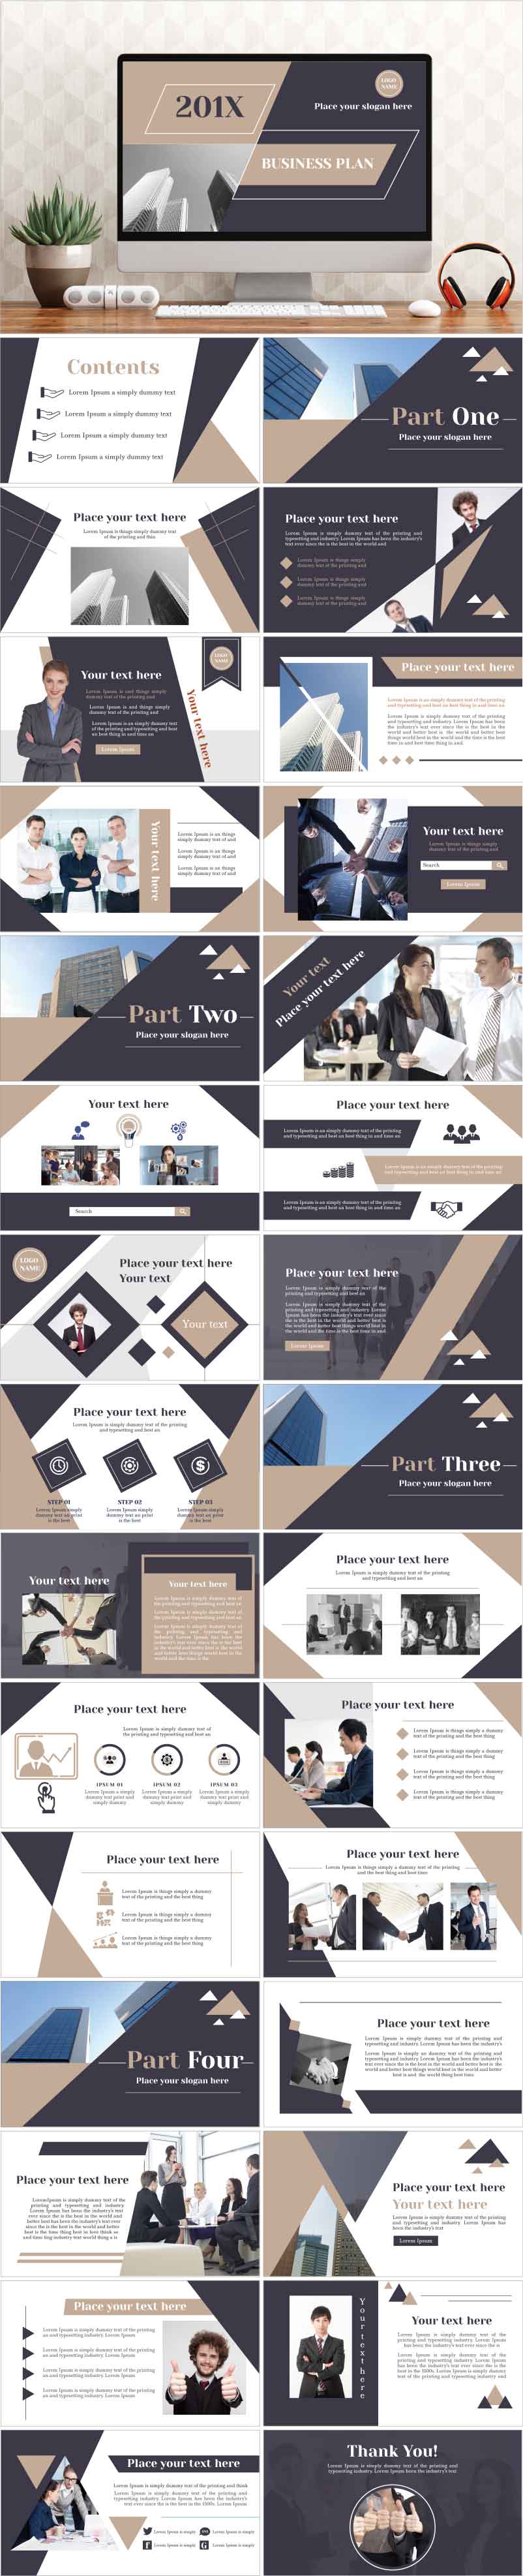 PowerPoint template vol.59